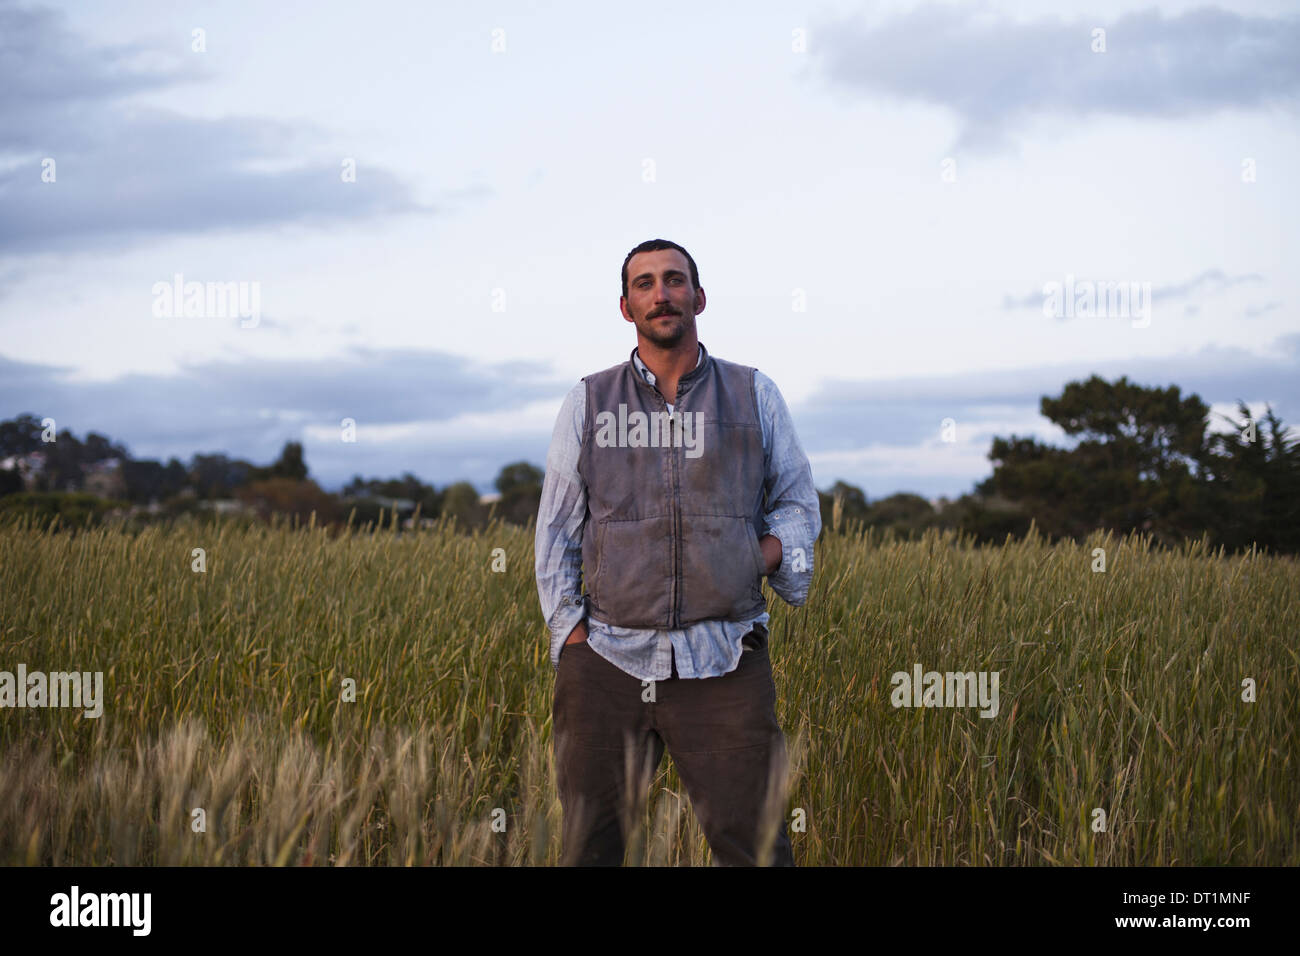 A man standing by a field of growing cereal crop at the social care and work project the Homeless Garden Project in Santa Cruz Stock Photo